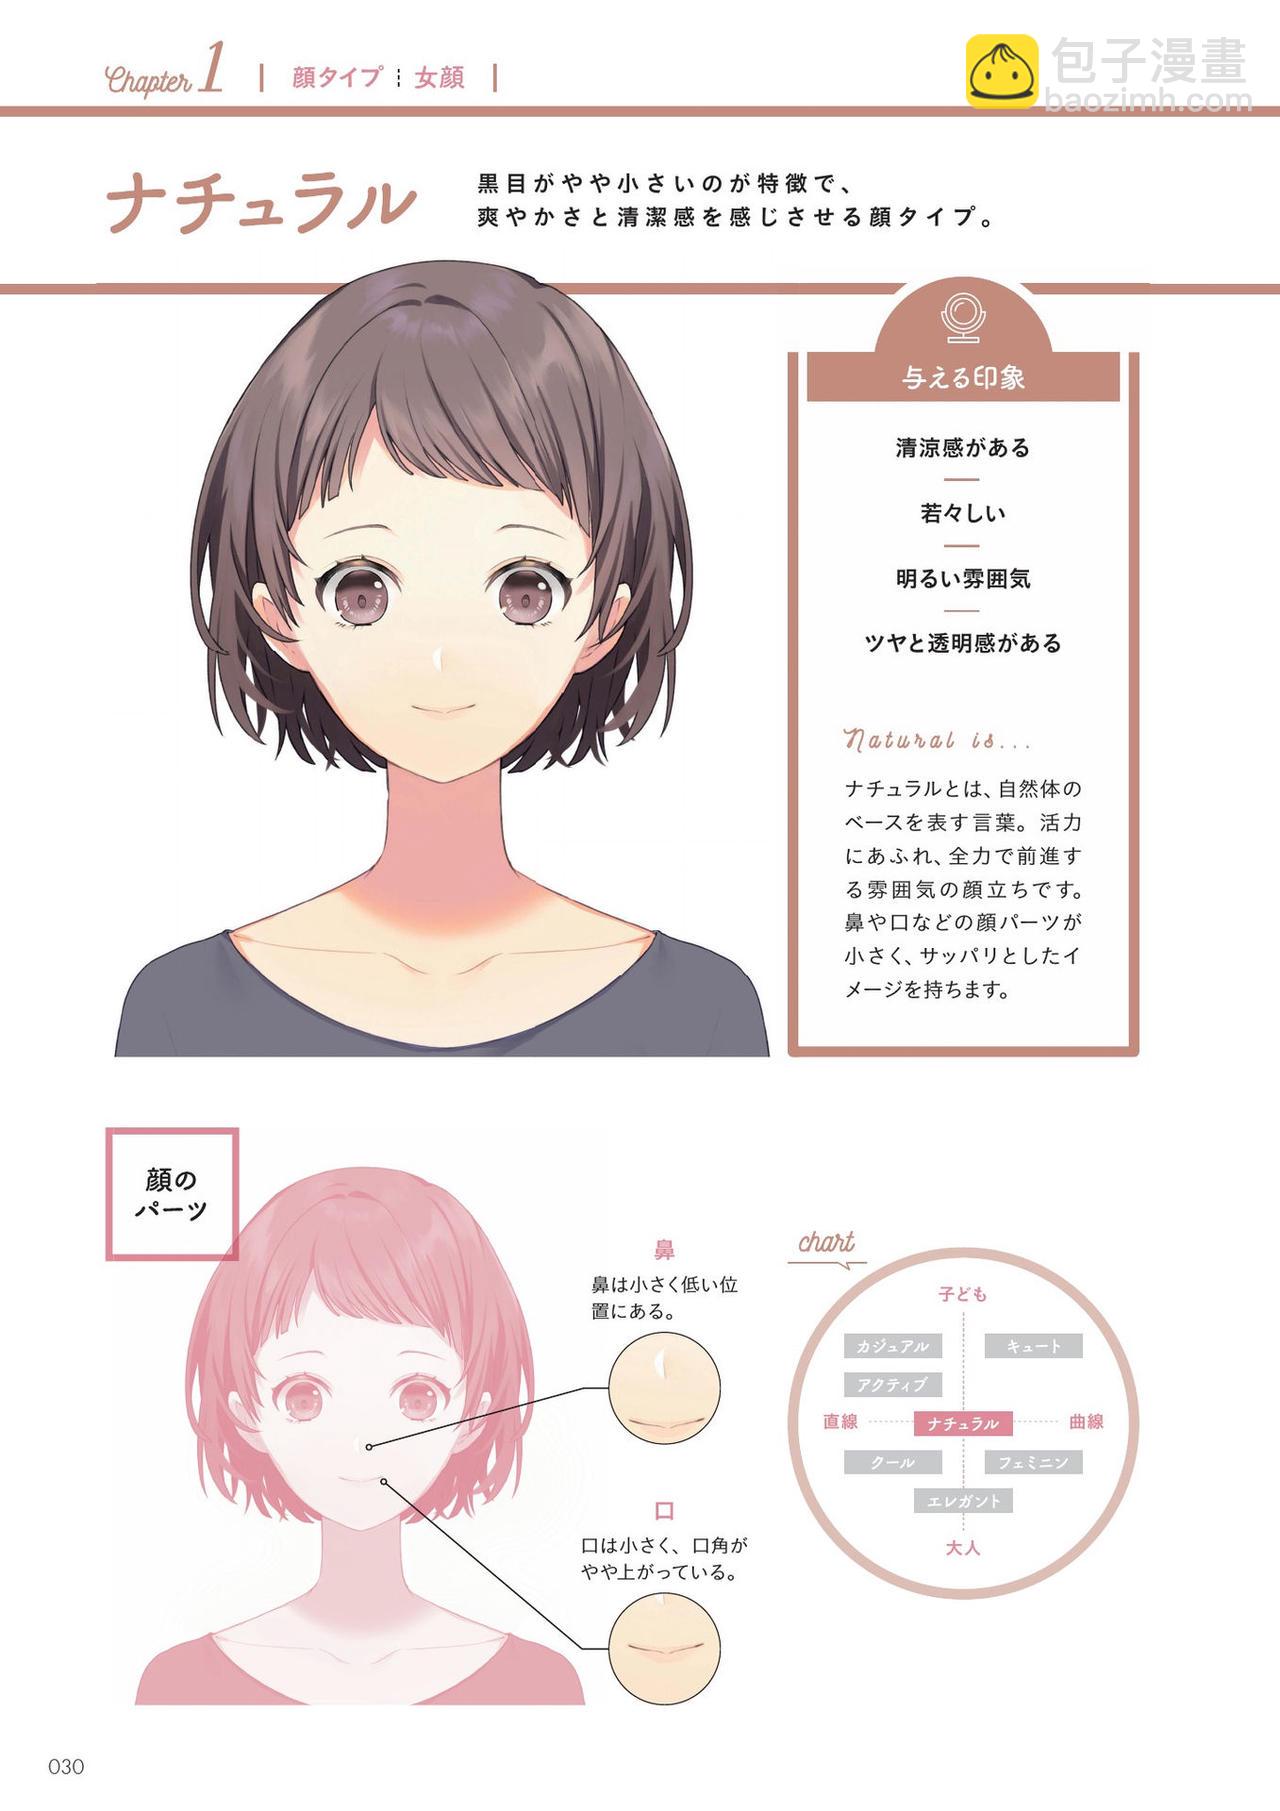 [sogawa]Super drawable series Techniques for drawing female characters with makeup  - 1話(1/4) - 8